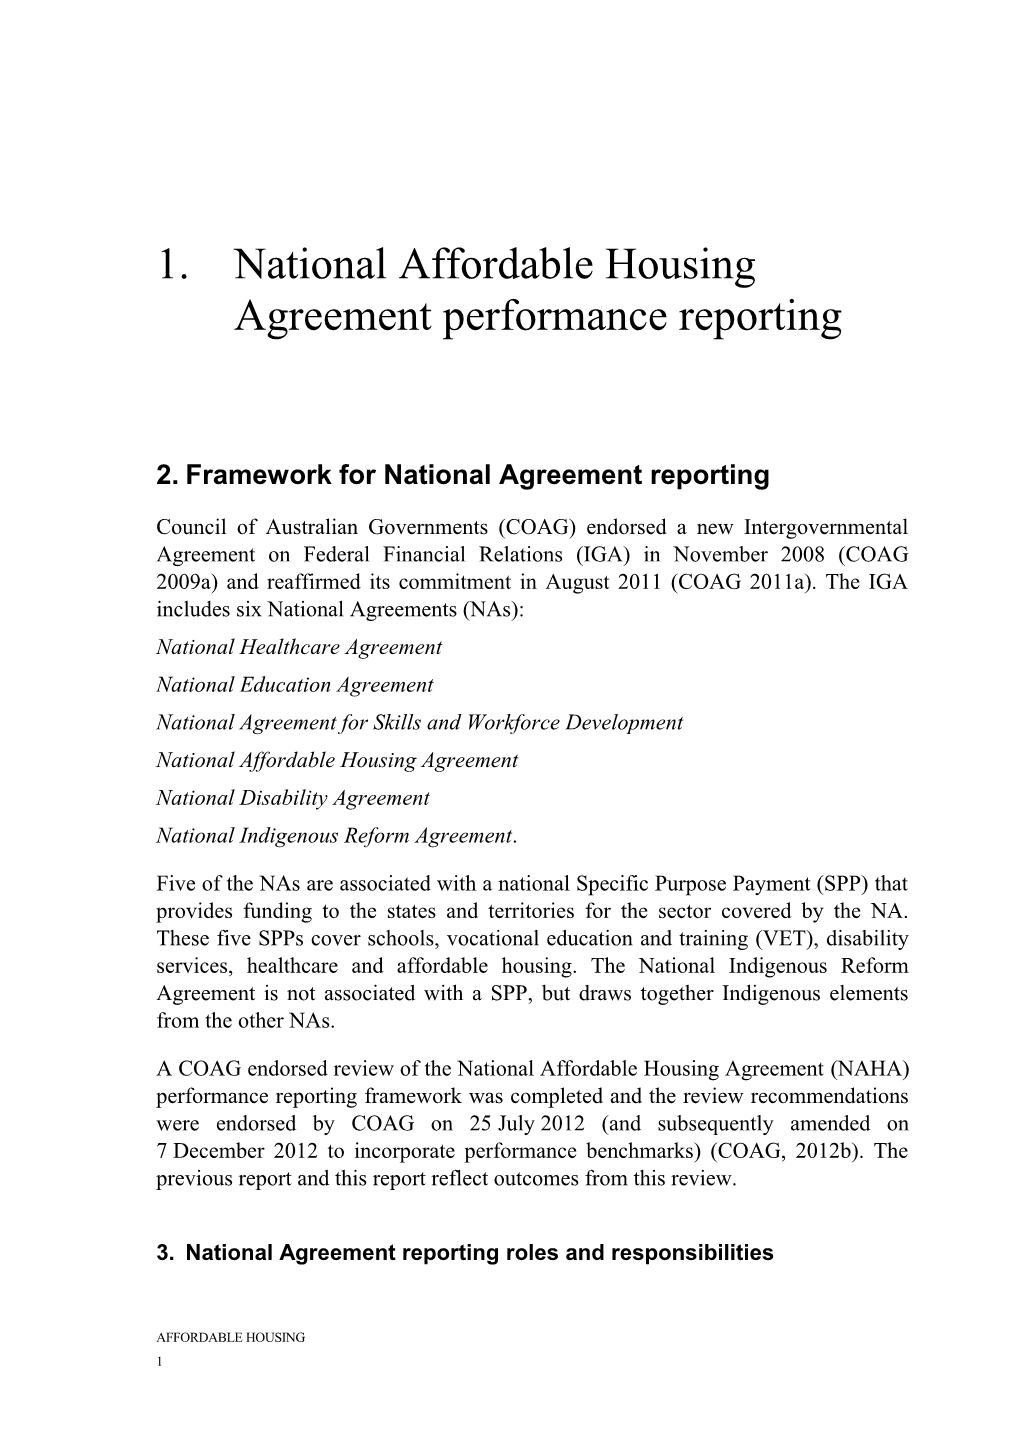 National Affordable Housing Agreement Performance Reporting